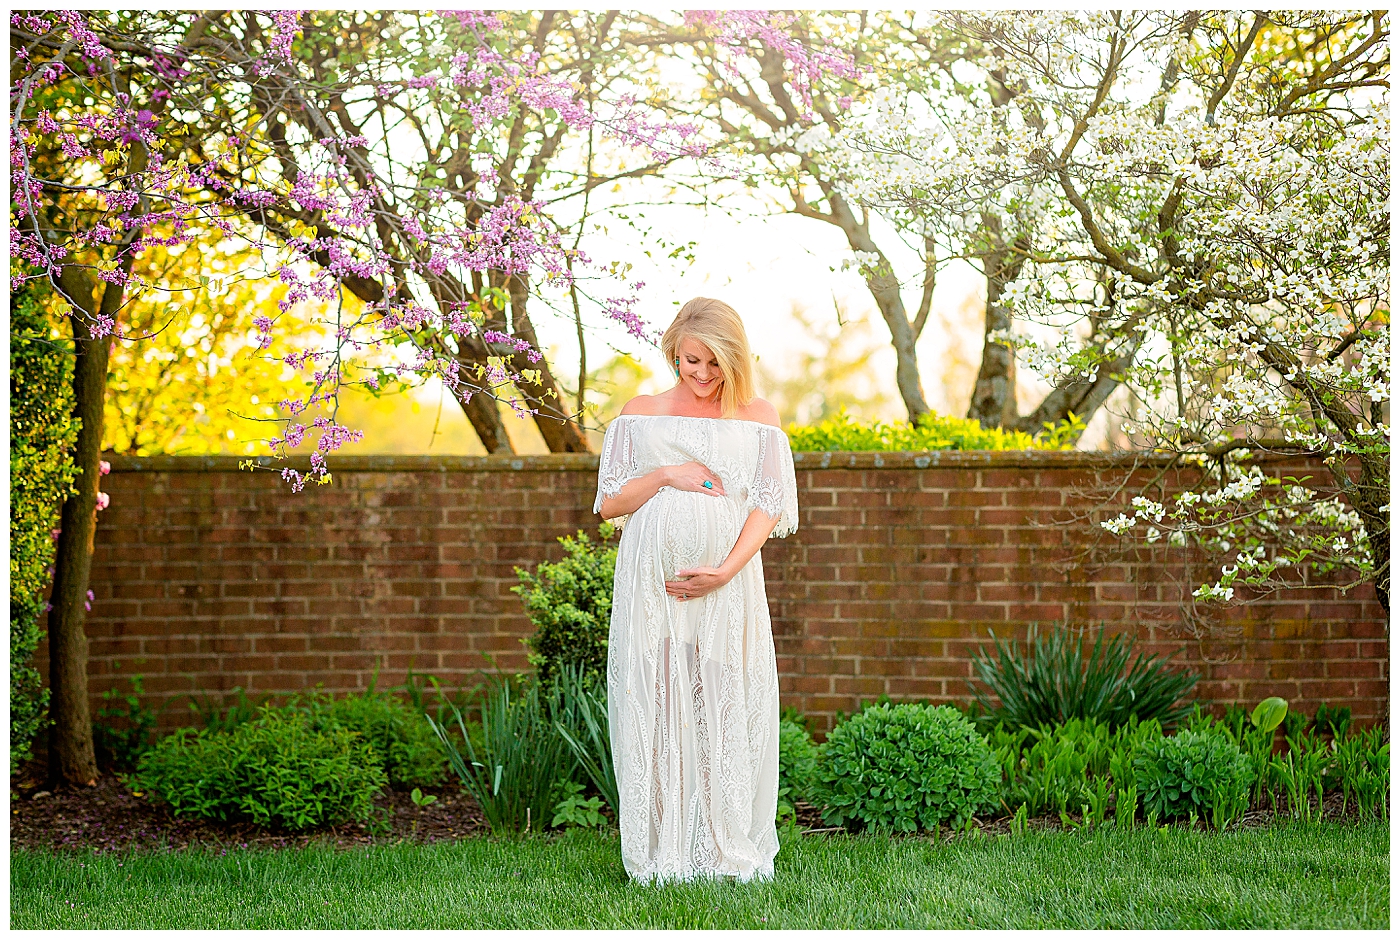 Pregnant woman in flower garden by Be Thou My Vision Photography